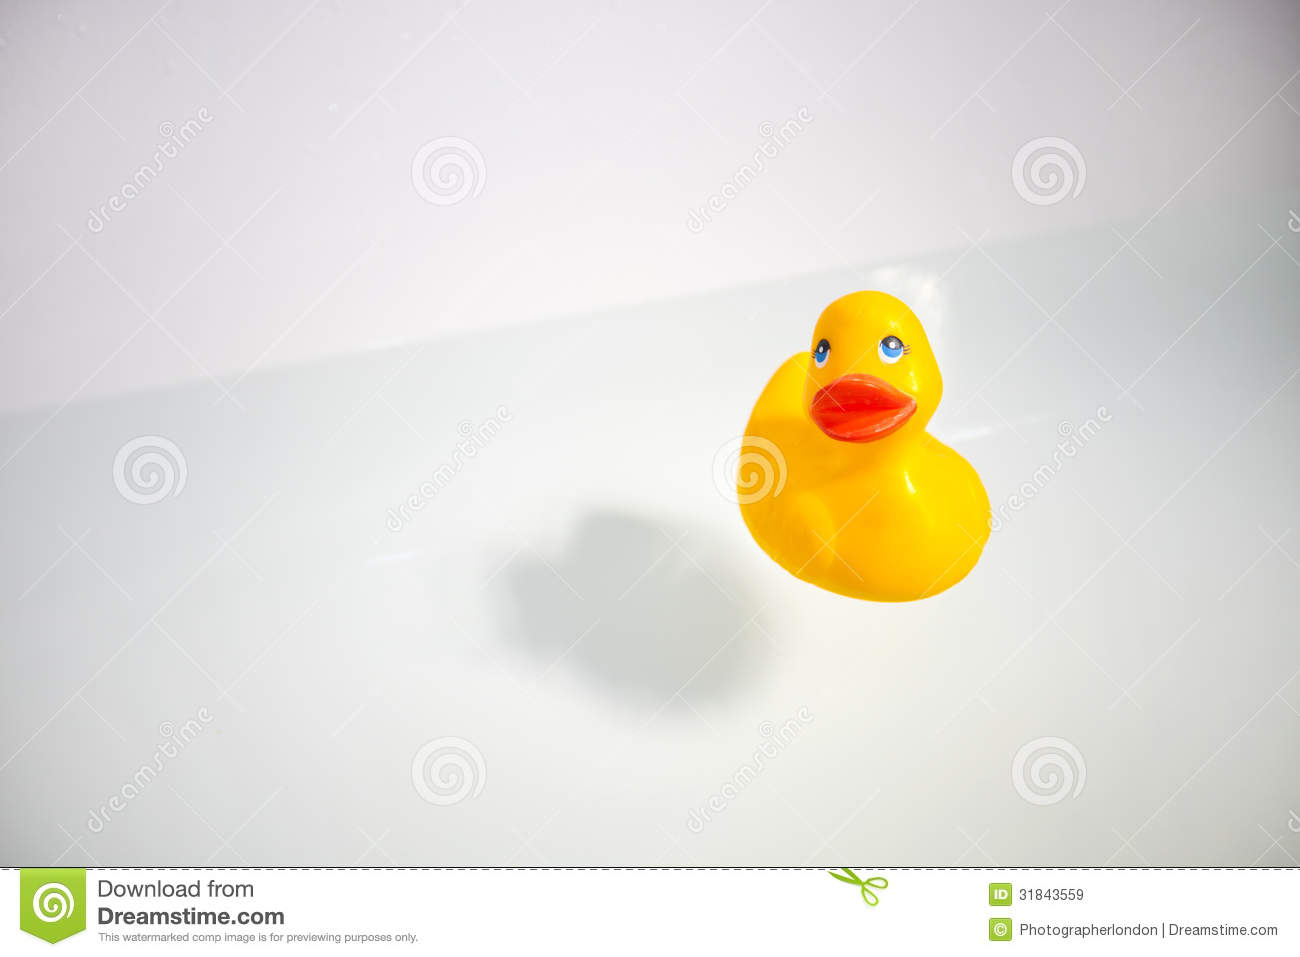 Rubber Duck In Bathtub Royalty Free Stock Images   Image  31843559